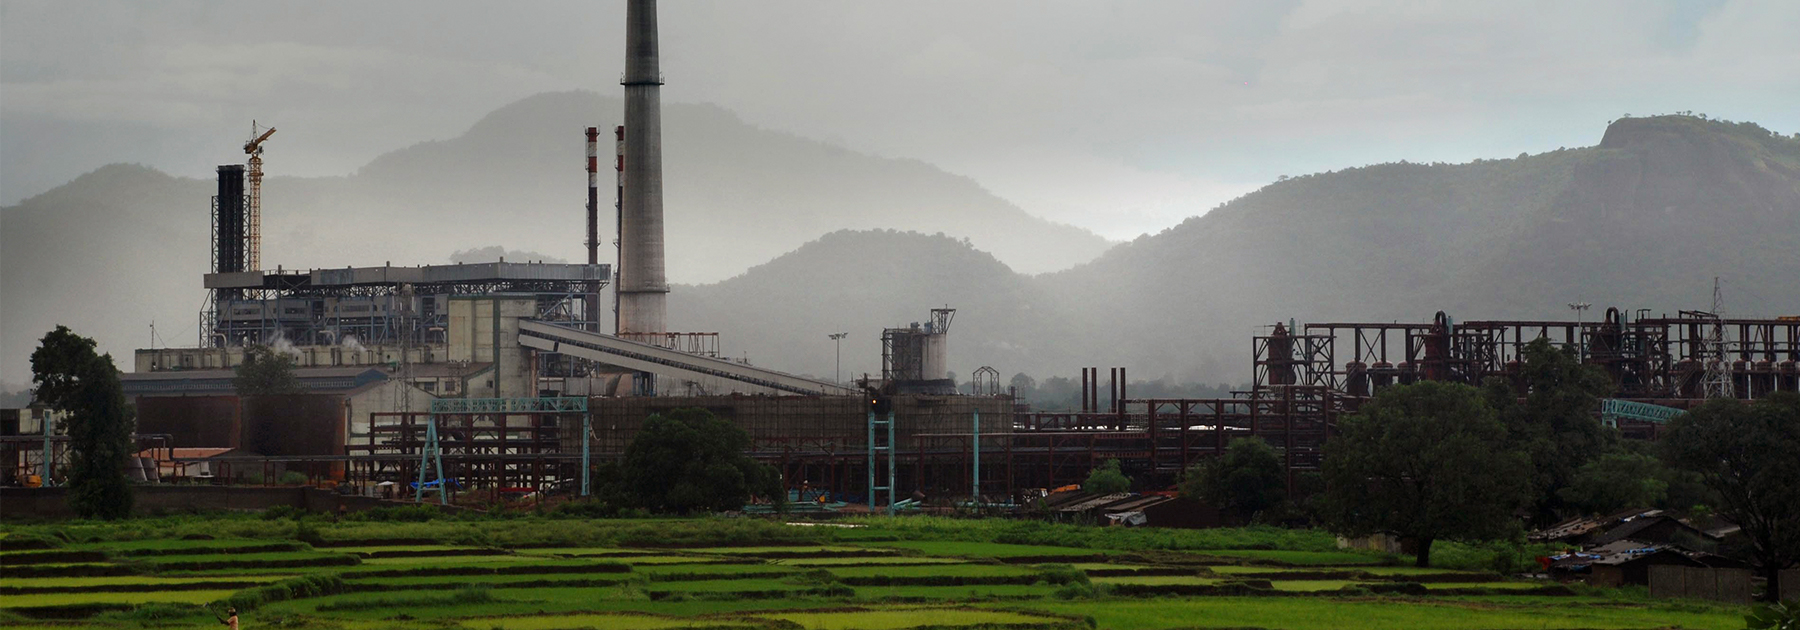 A general view of the Vedanta aluminum refinery at Lanjigarh. (STRDEL/AFP/Getty Images)